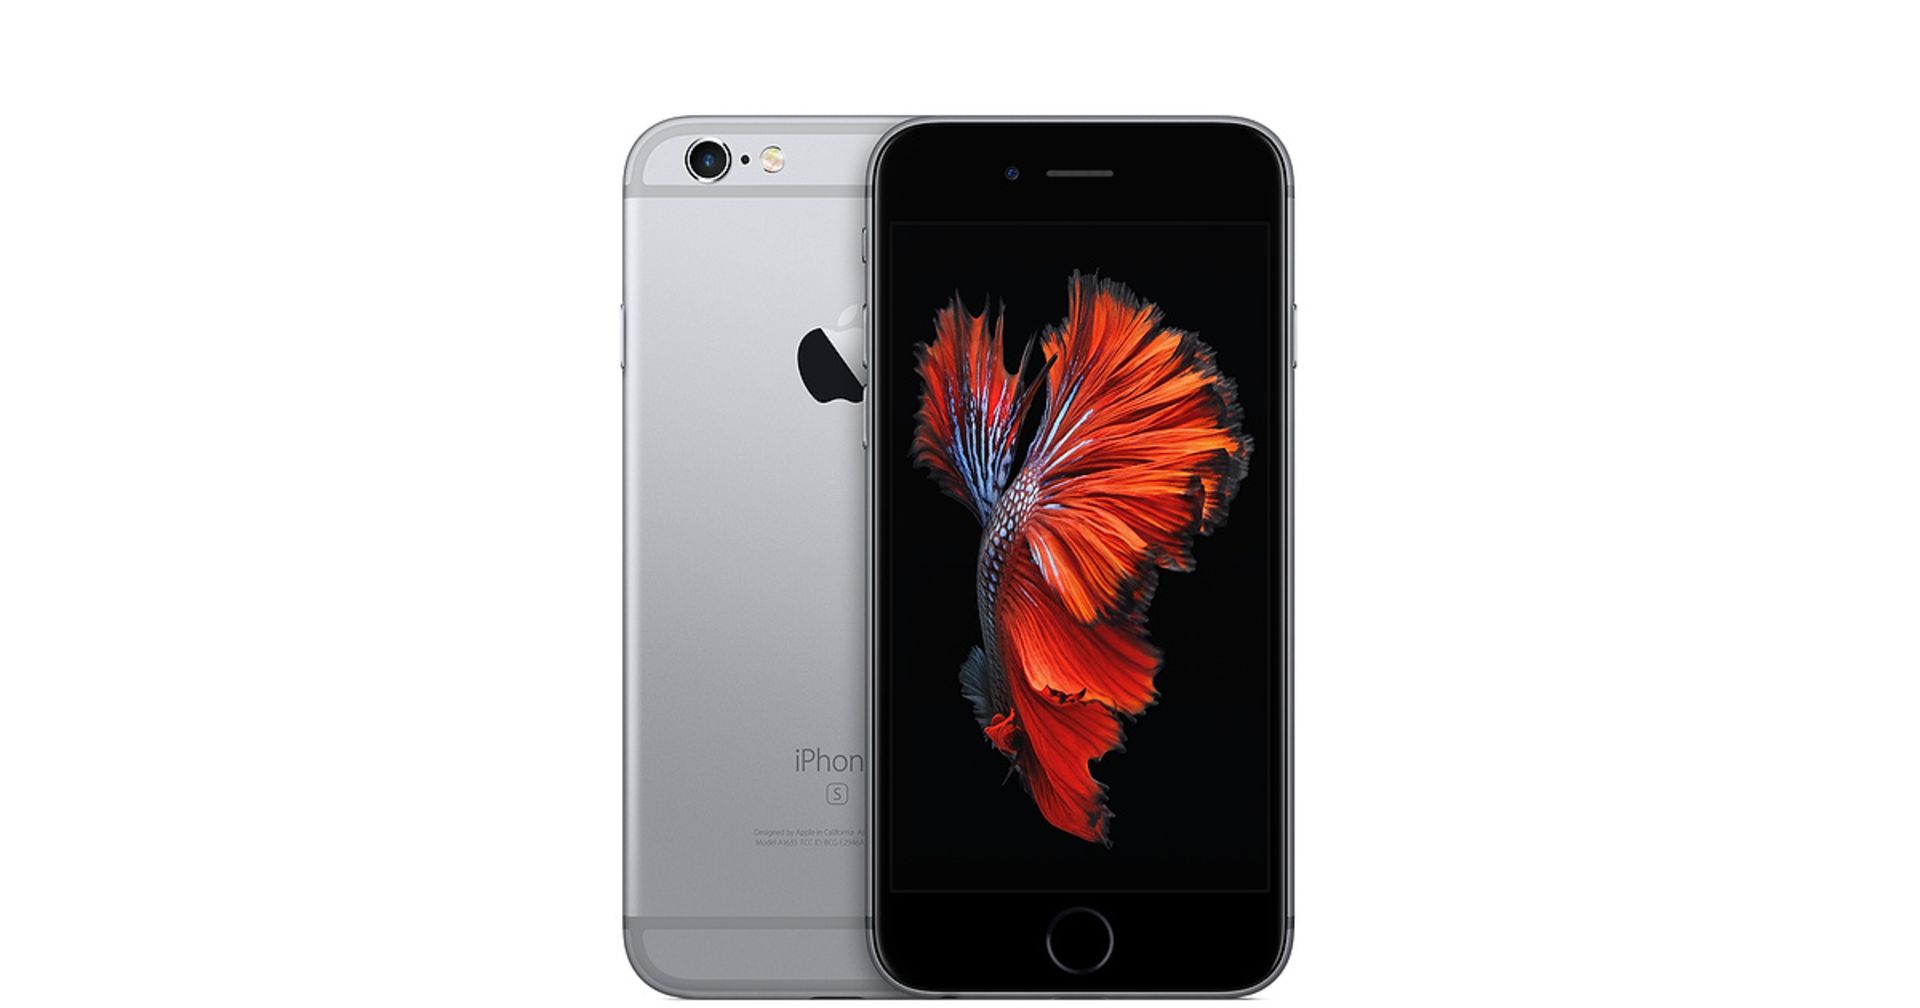 Grade A Apple iPhone 6s 16GB - Black/Space Grey - Touch ID - Dual Core - IOS - 12MP Camera - Apple